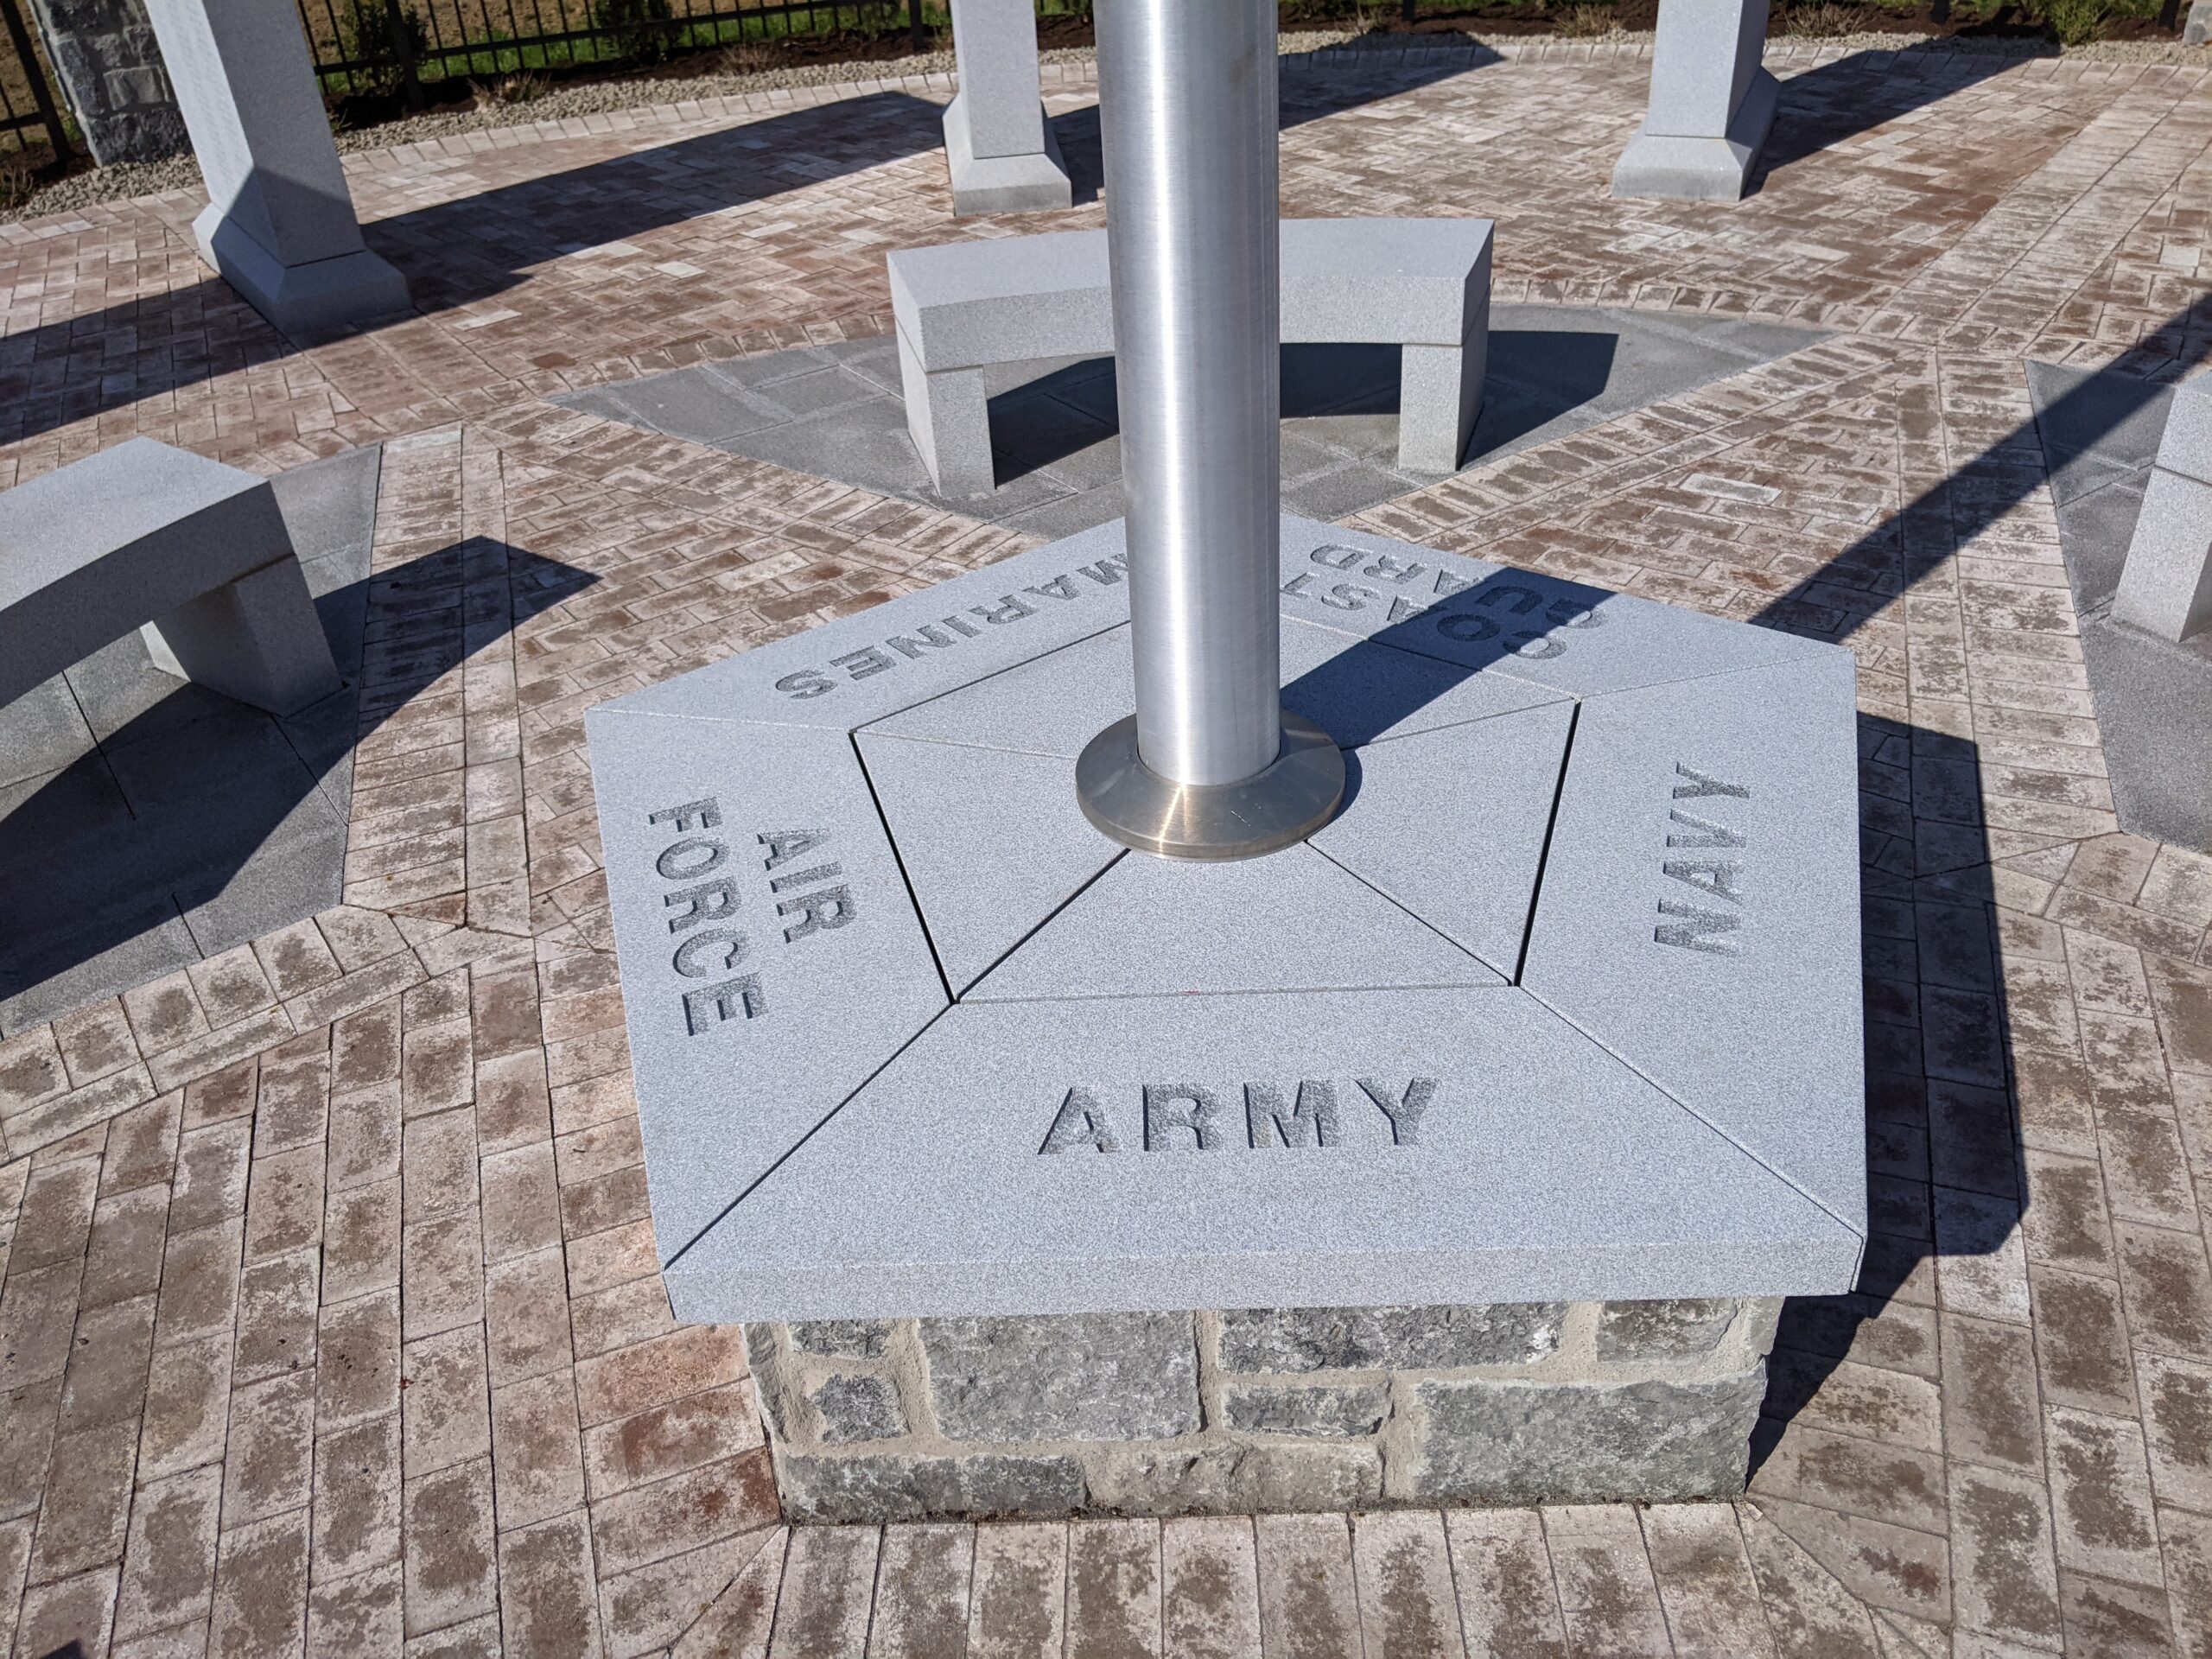 A flag pole contains the names of U.S. military branches